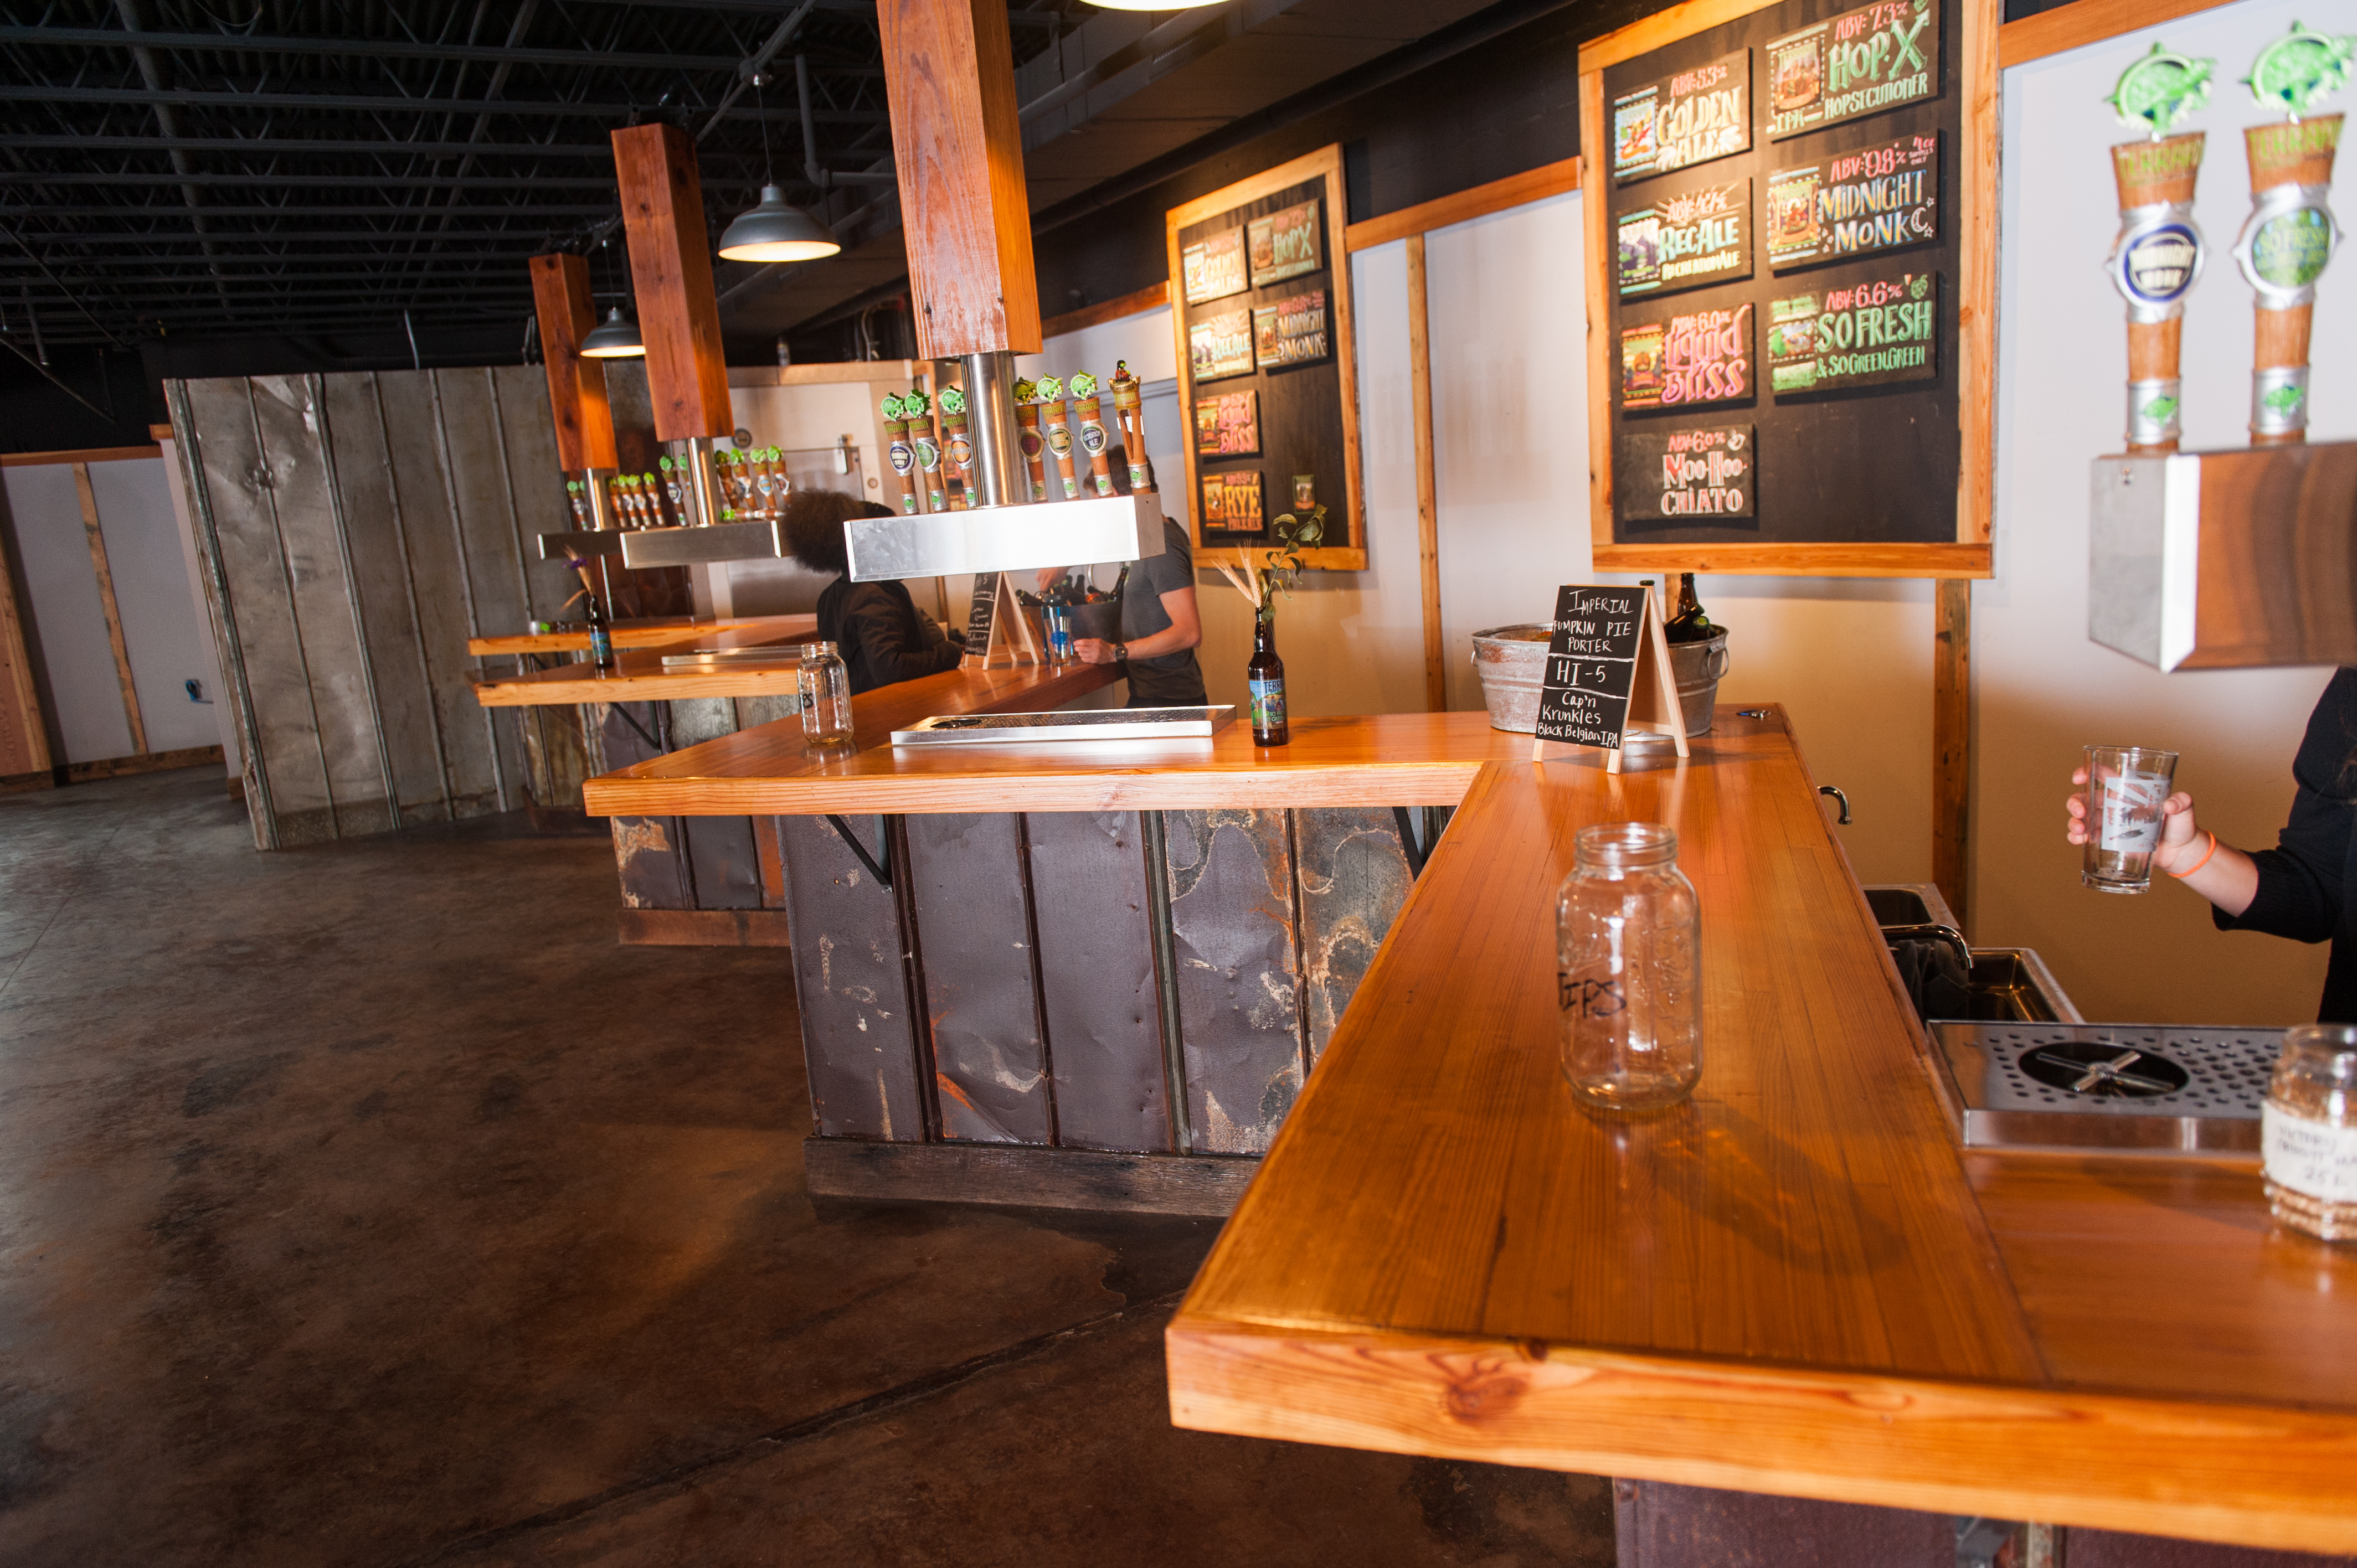 terrapin-beer-company-tasting-stations-credit-anne-yarbrough